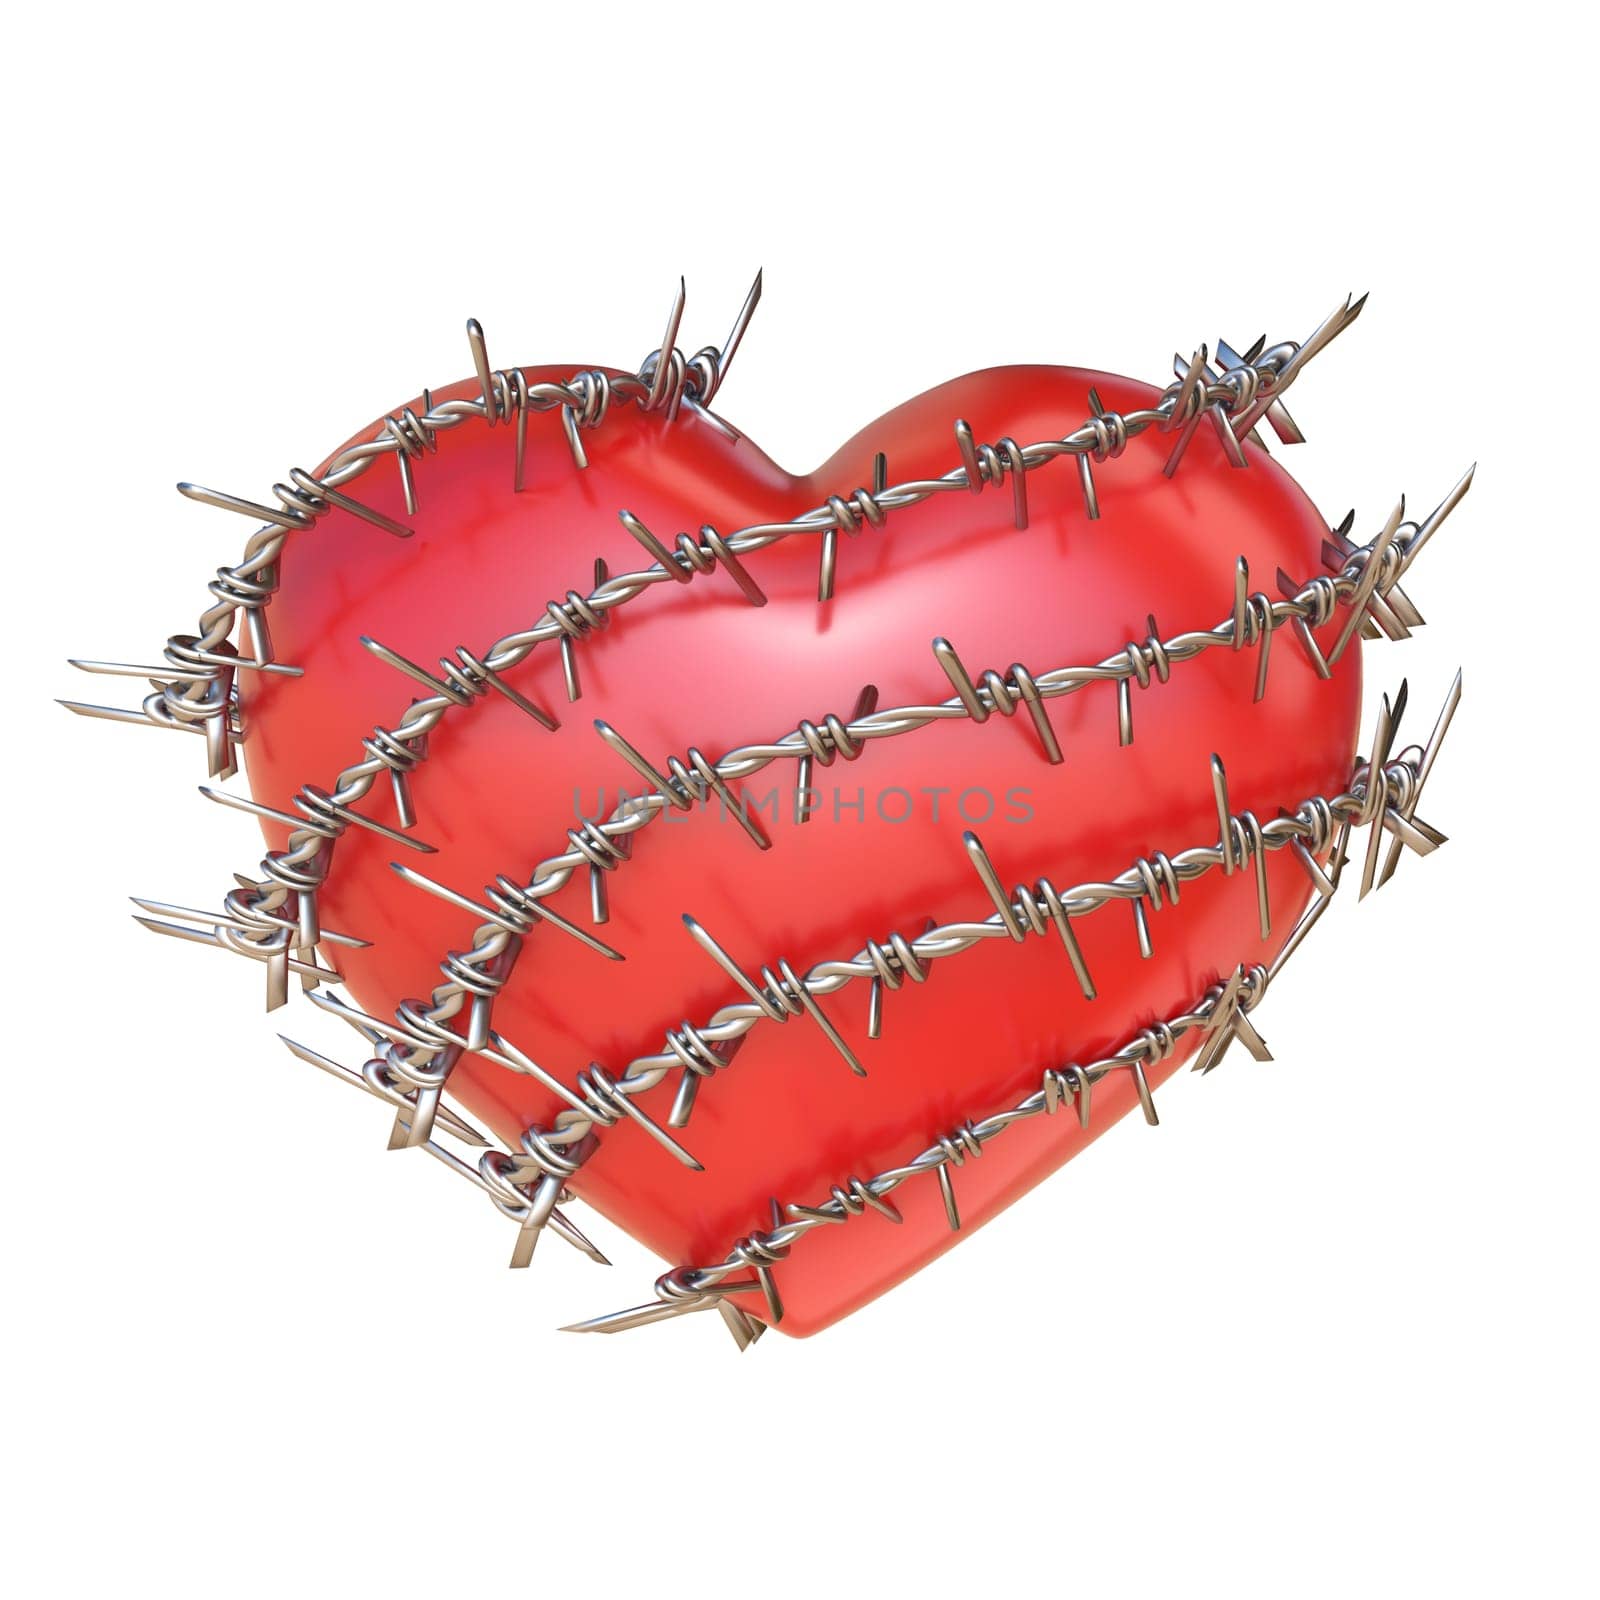 Heart surrounded by barbed wire 3D by djmilic